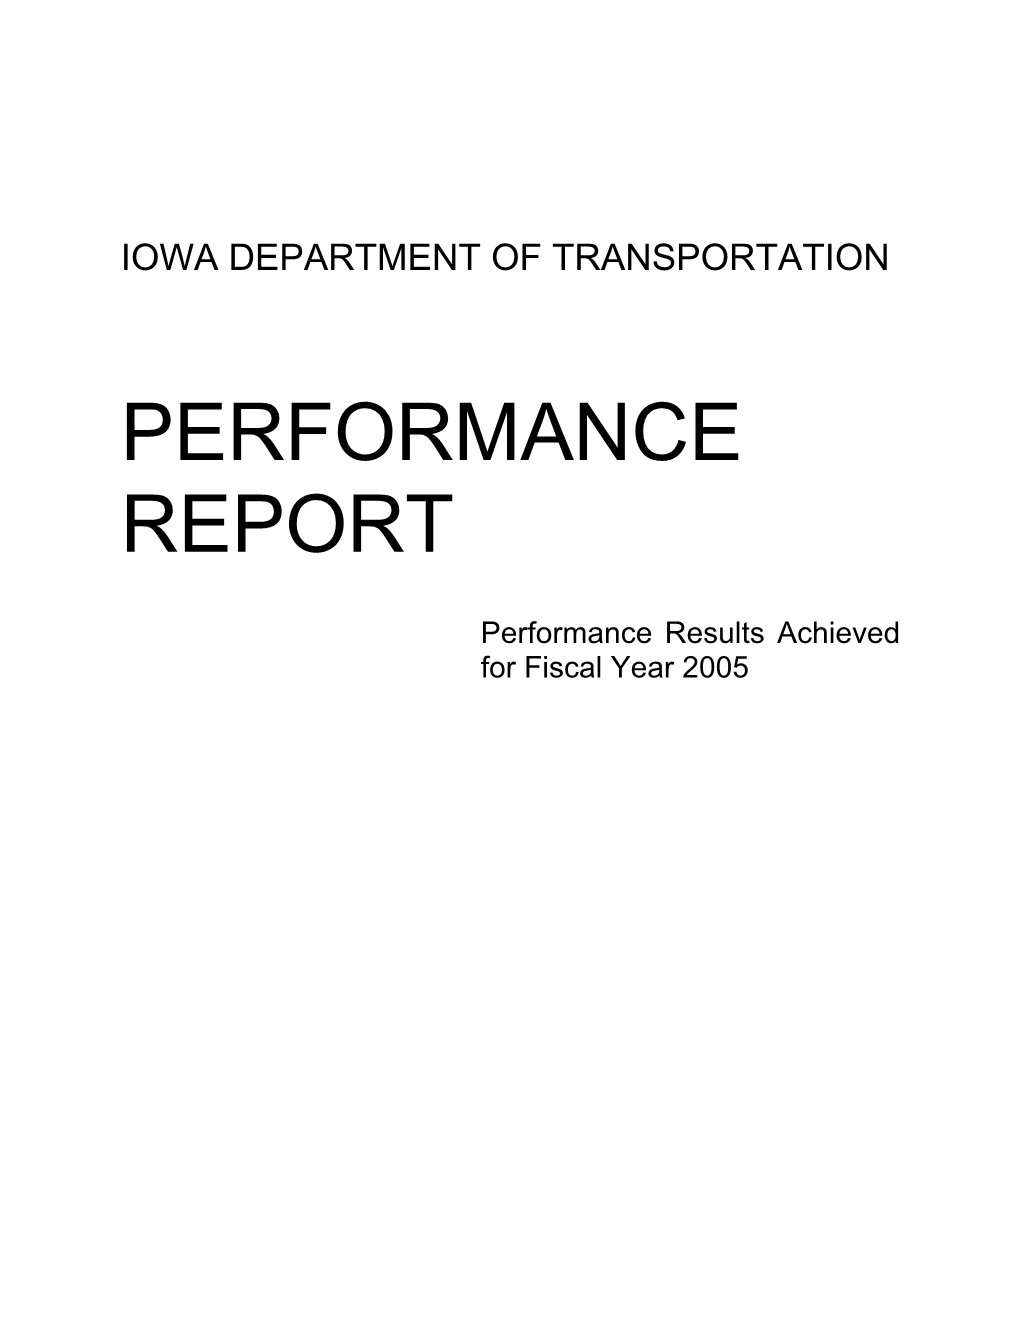 Performance Results Achieved for Fiscal Year 2005